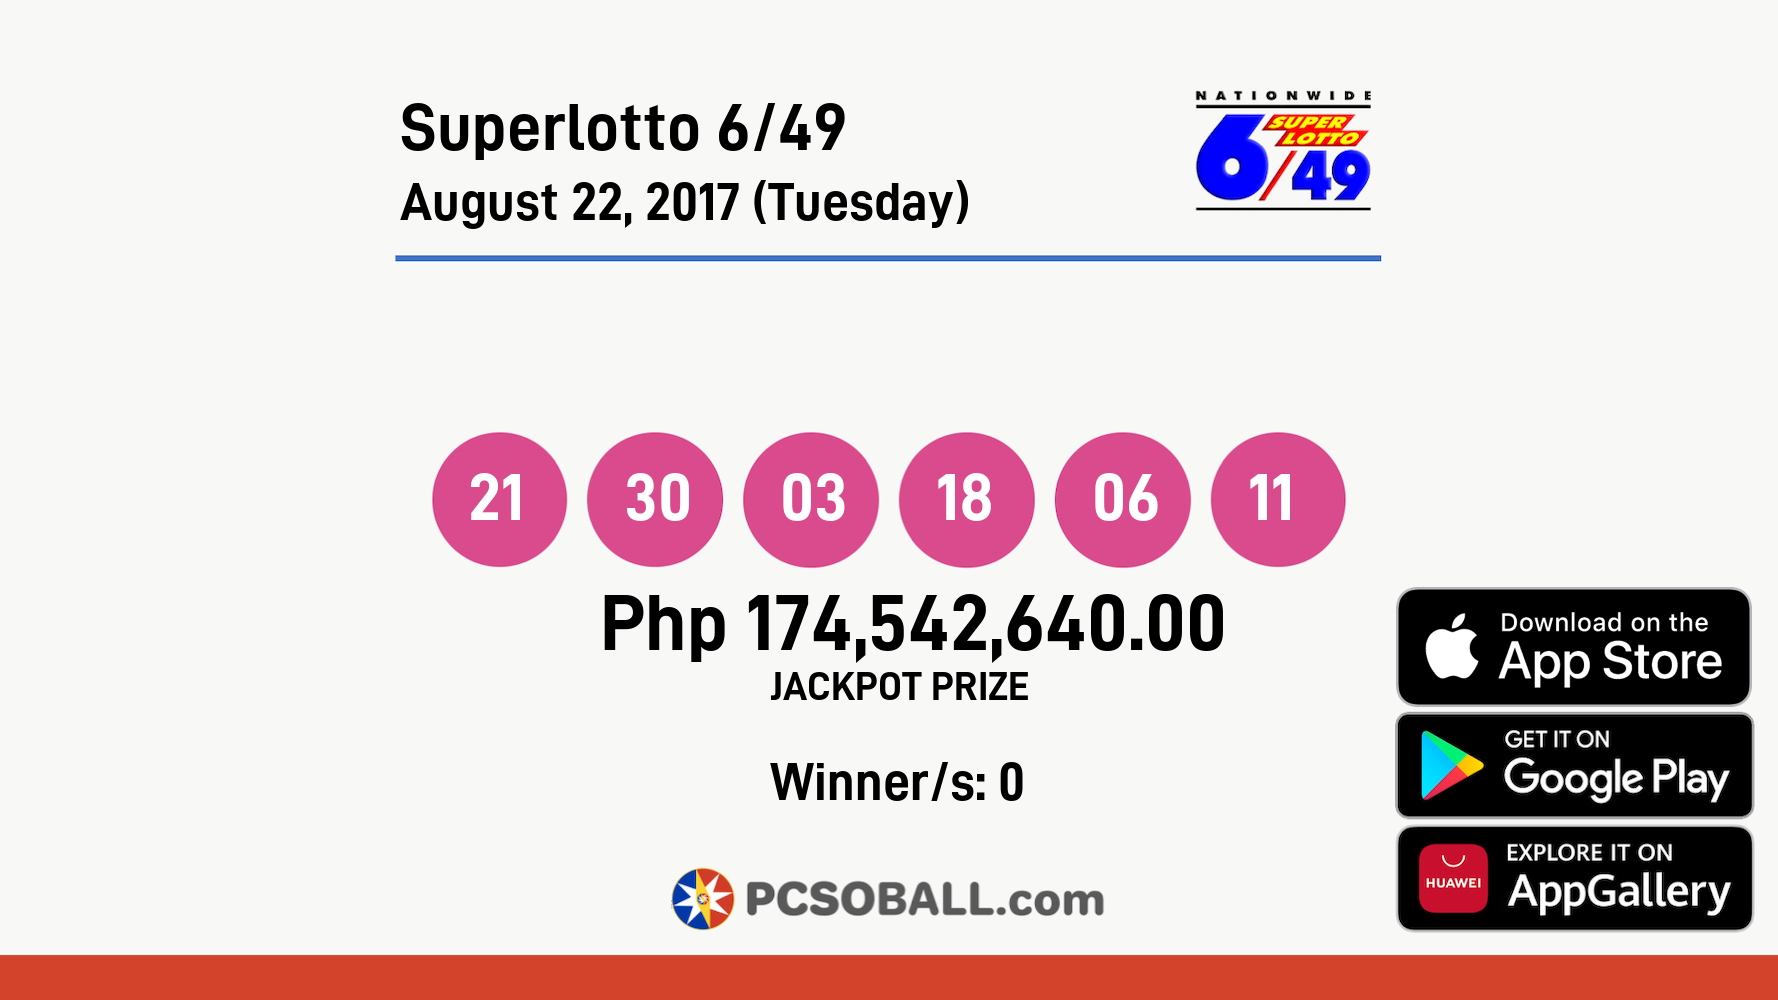 Superlotto 6/49 August 22, 2017 (Tuesday) Result